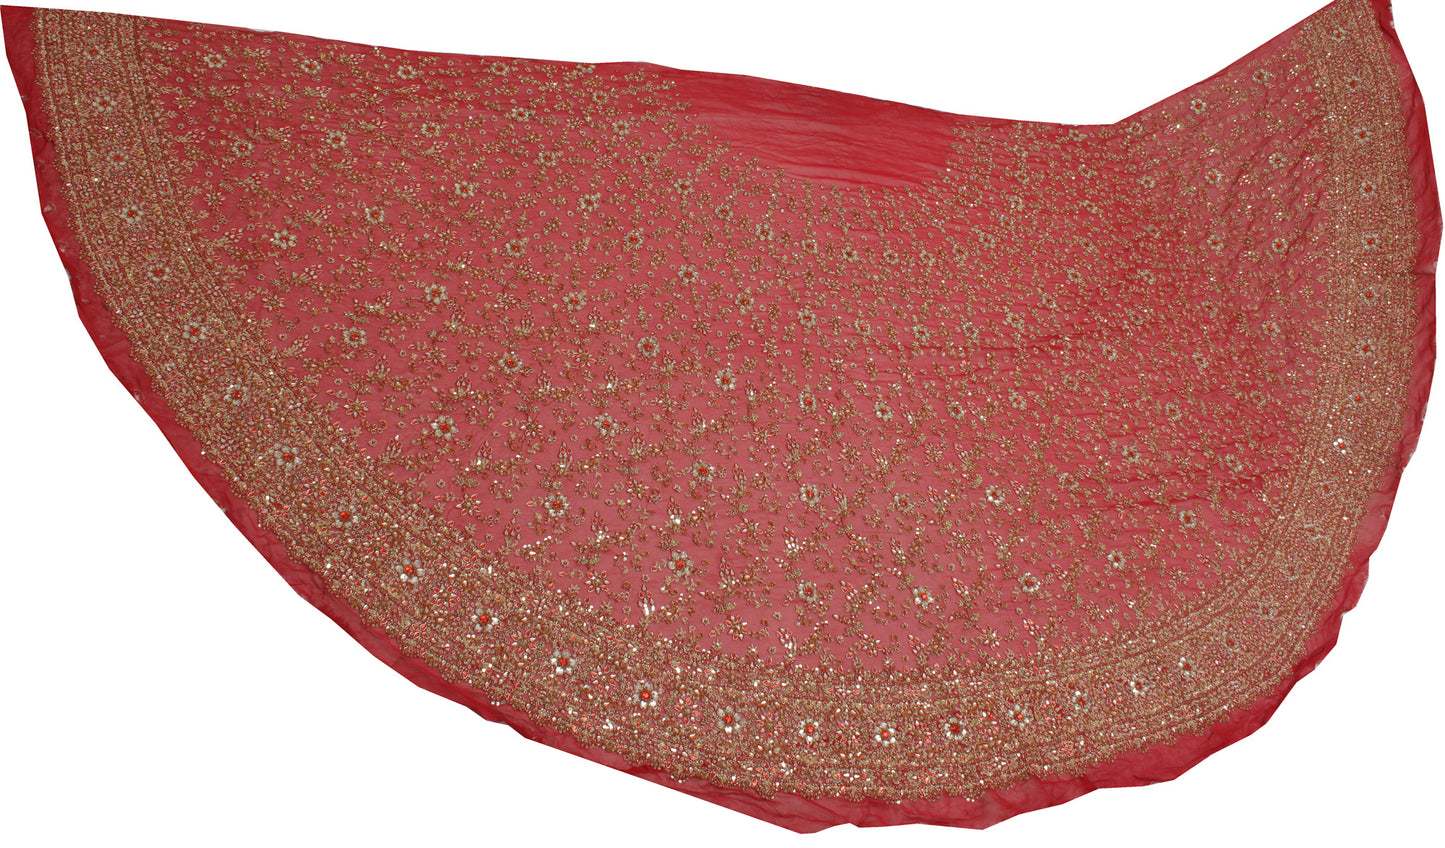 Sushila Vintage Red Long Skirt Pure Georgette Hand Beaded Unstitched Lehenga